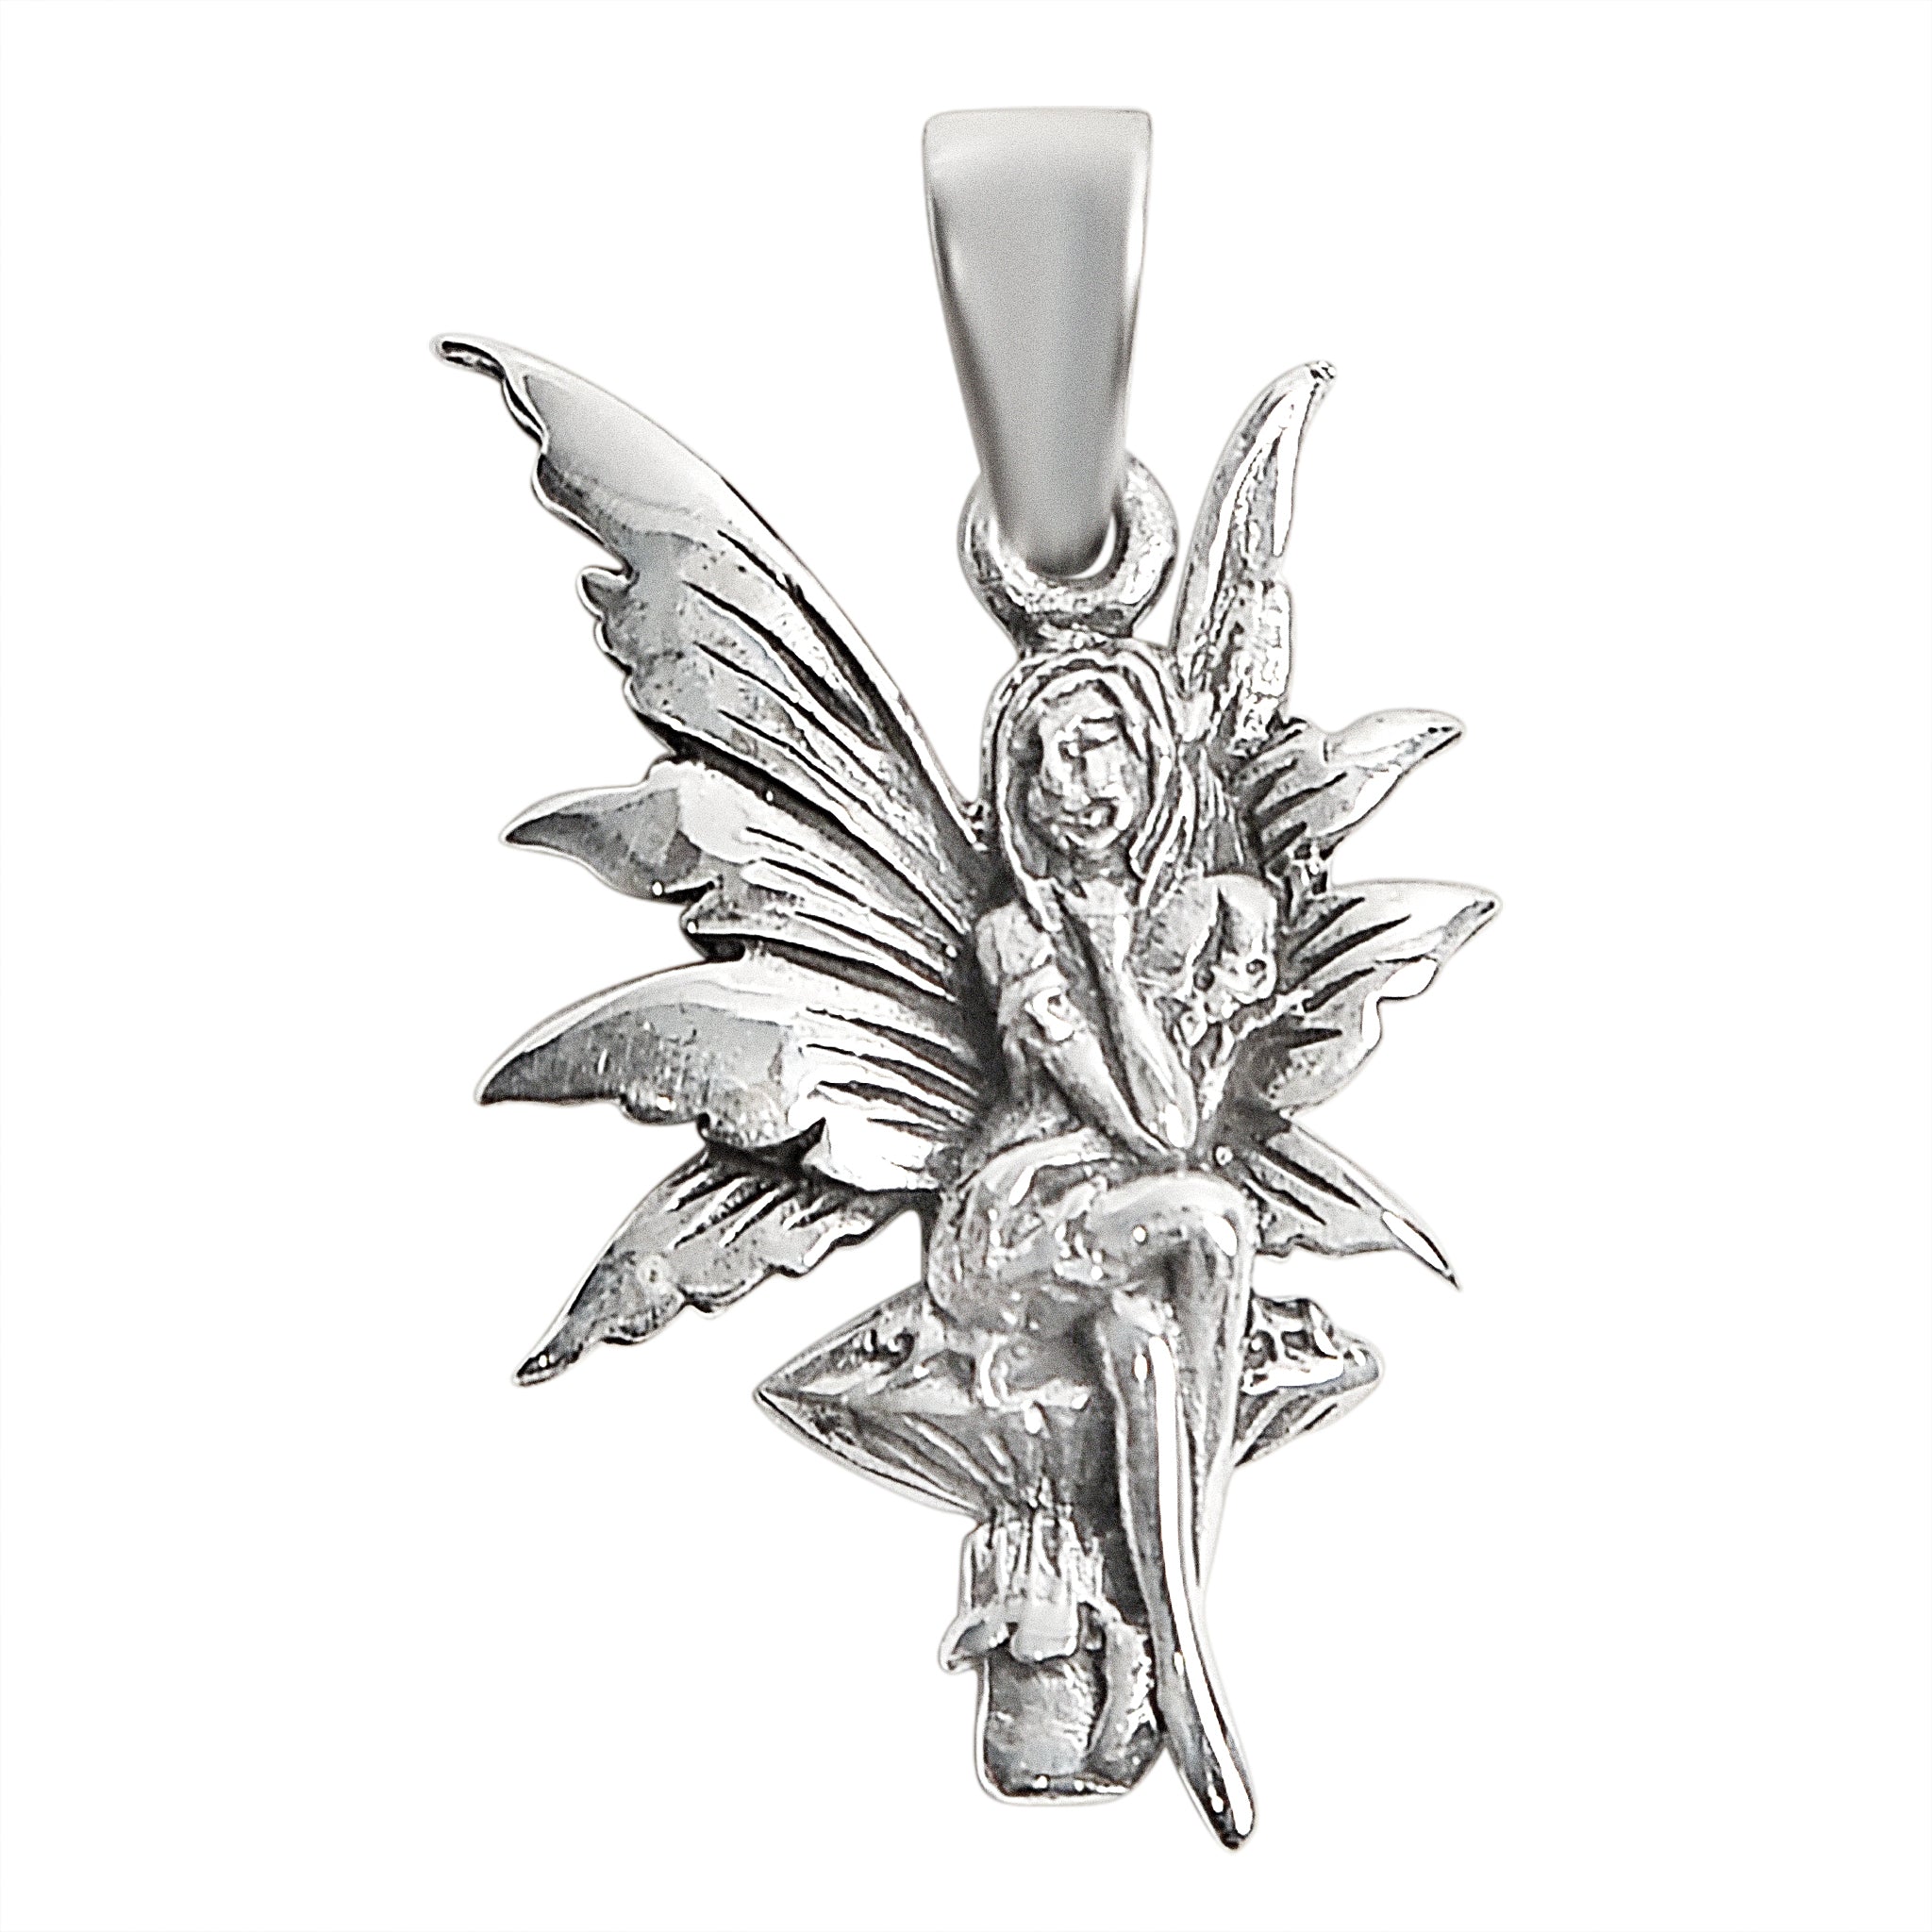 Sterling Silver Fairy on Mushroom Pendant / SSP0165-sterling silver pendant- .925 sterling silver pendant- Black Friday Gift- silver pendant- necklace pendant